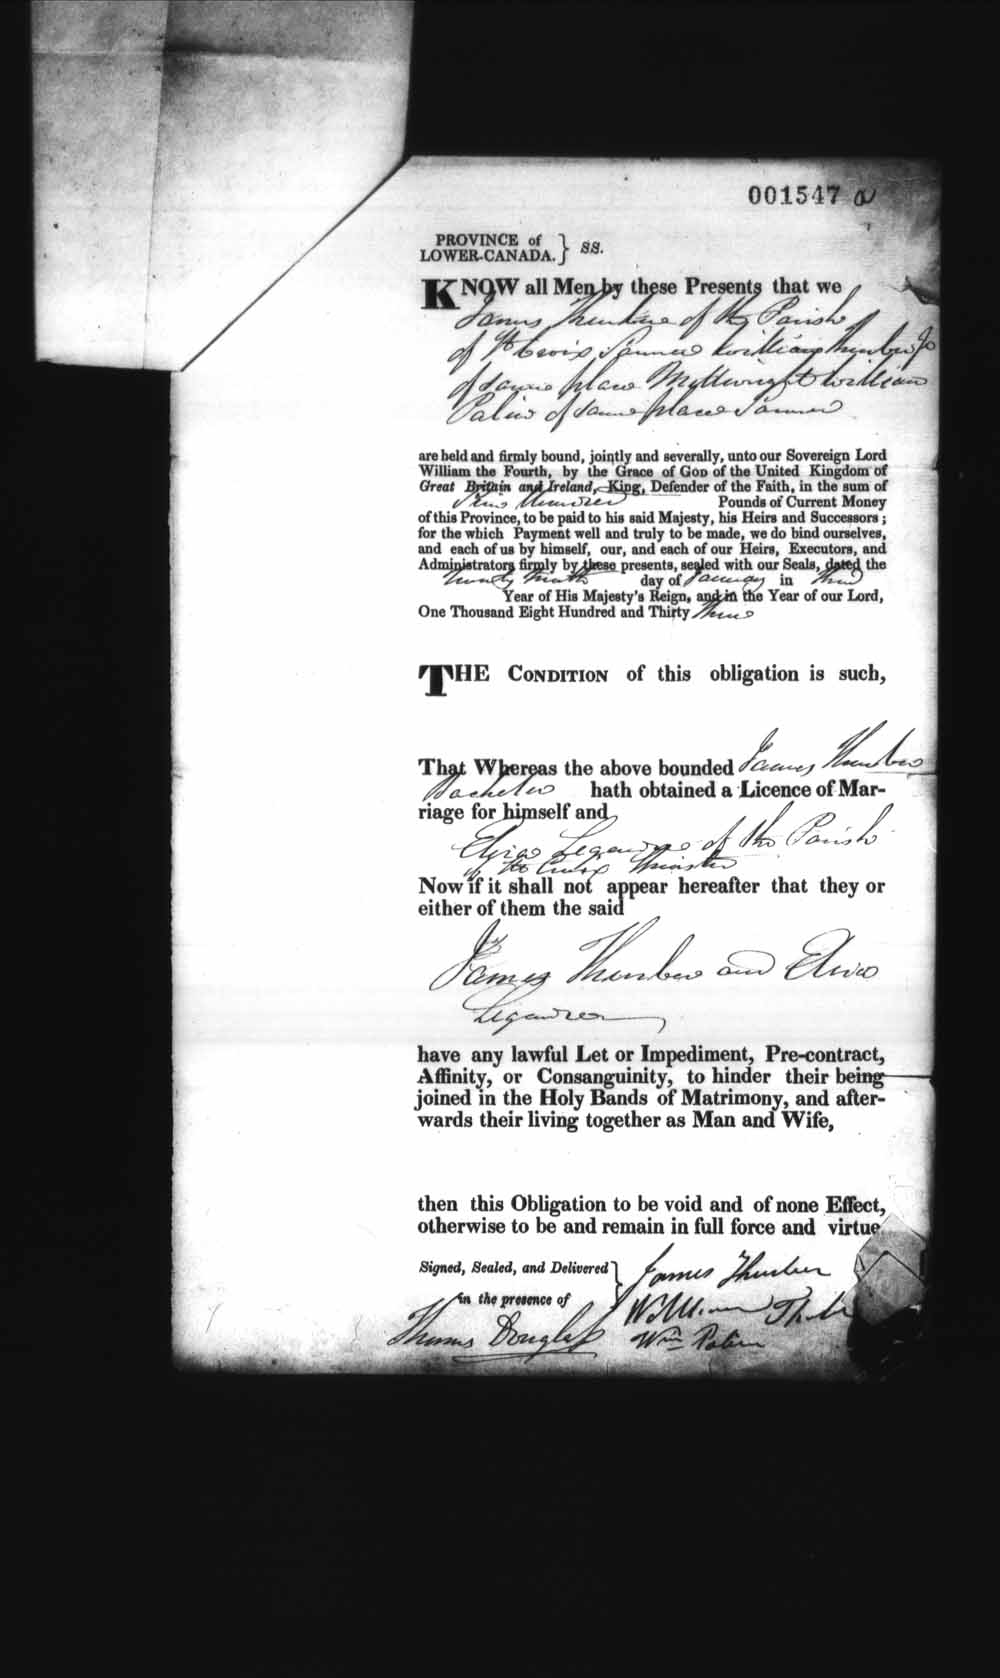 Digitized page of Upper and Lower Canada Marriage Bonds (1779-1865) for Image No.: e008237851